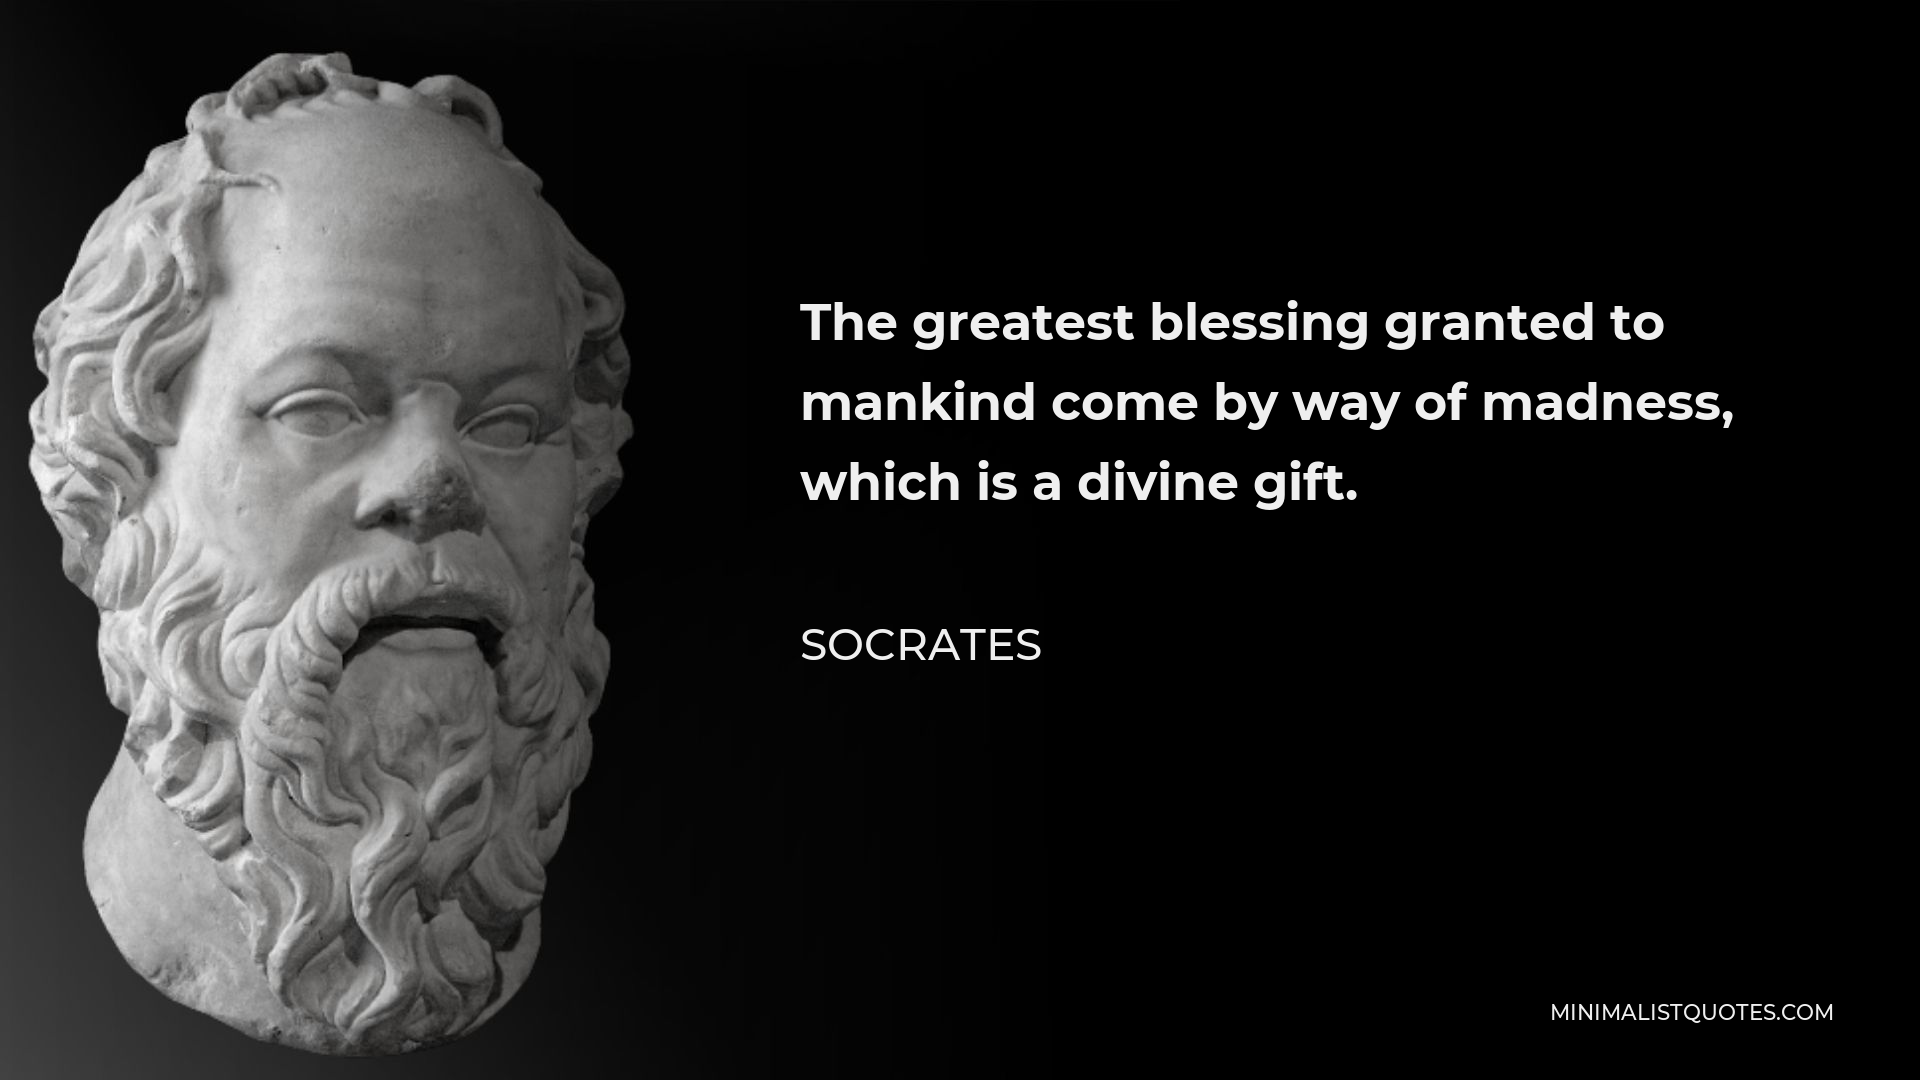 Socrates Quote - The greatest blessing granted to mankind come by way of madness, which is a divine gift.